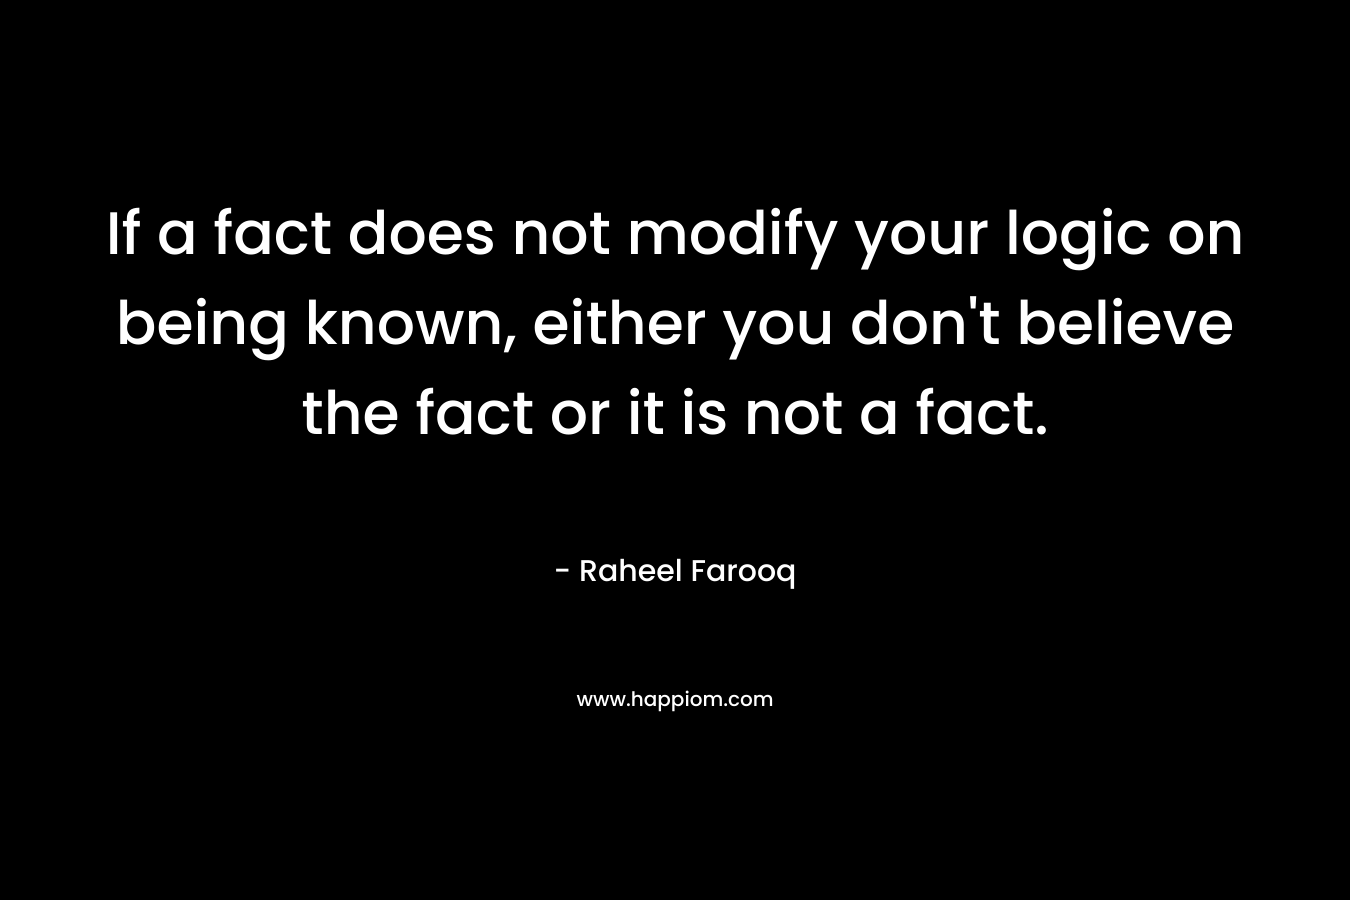 If a fact does not modify your logic on being known, either you don't believe the fact or it is not a fact.